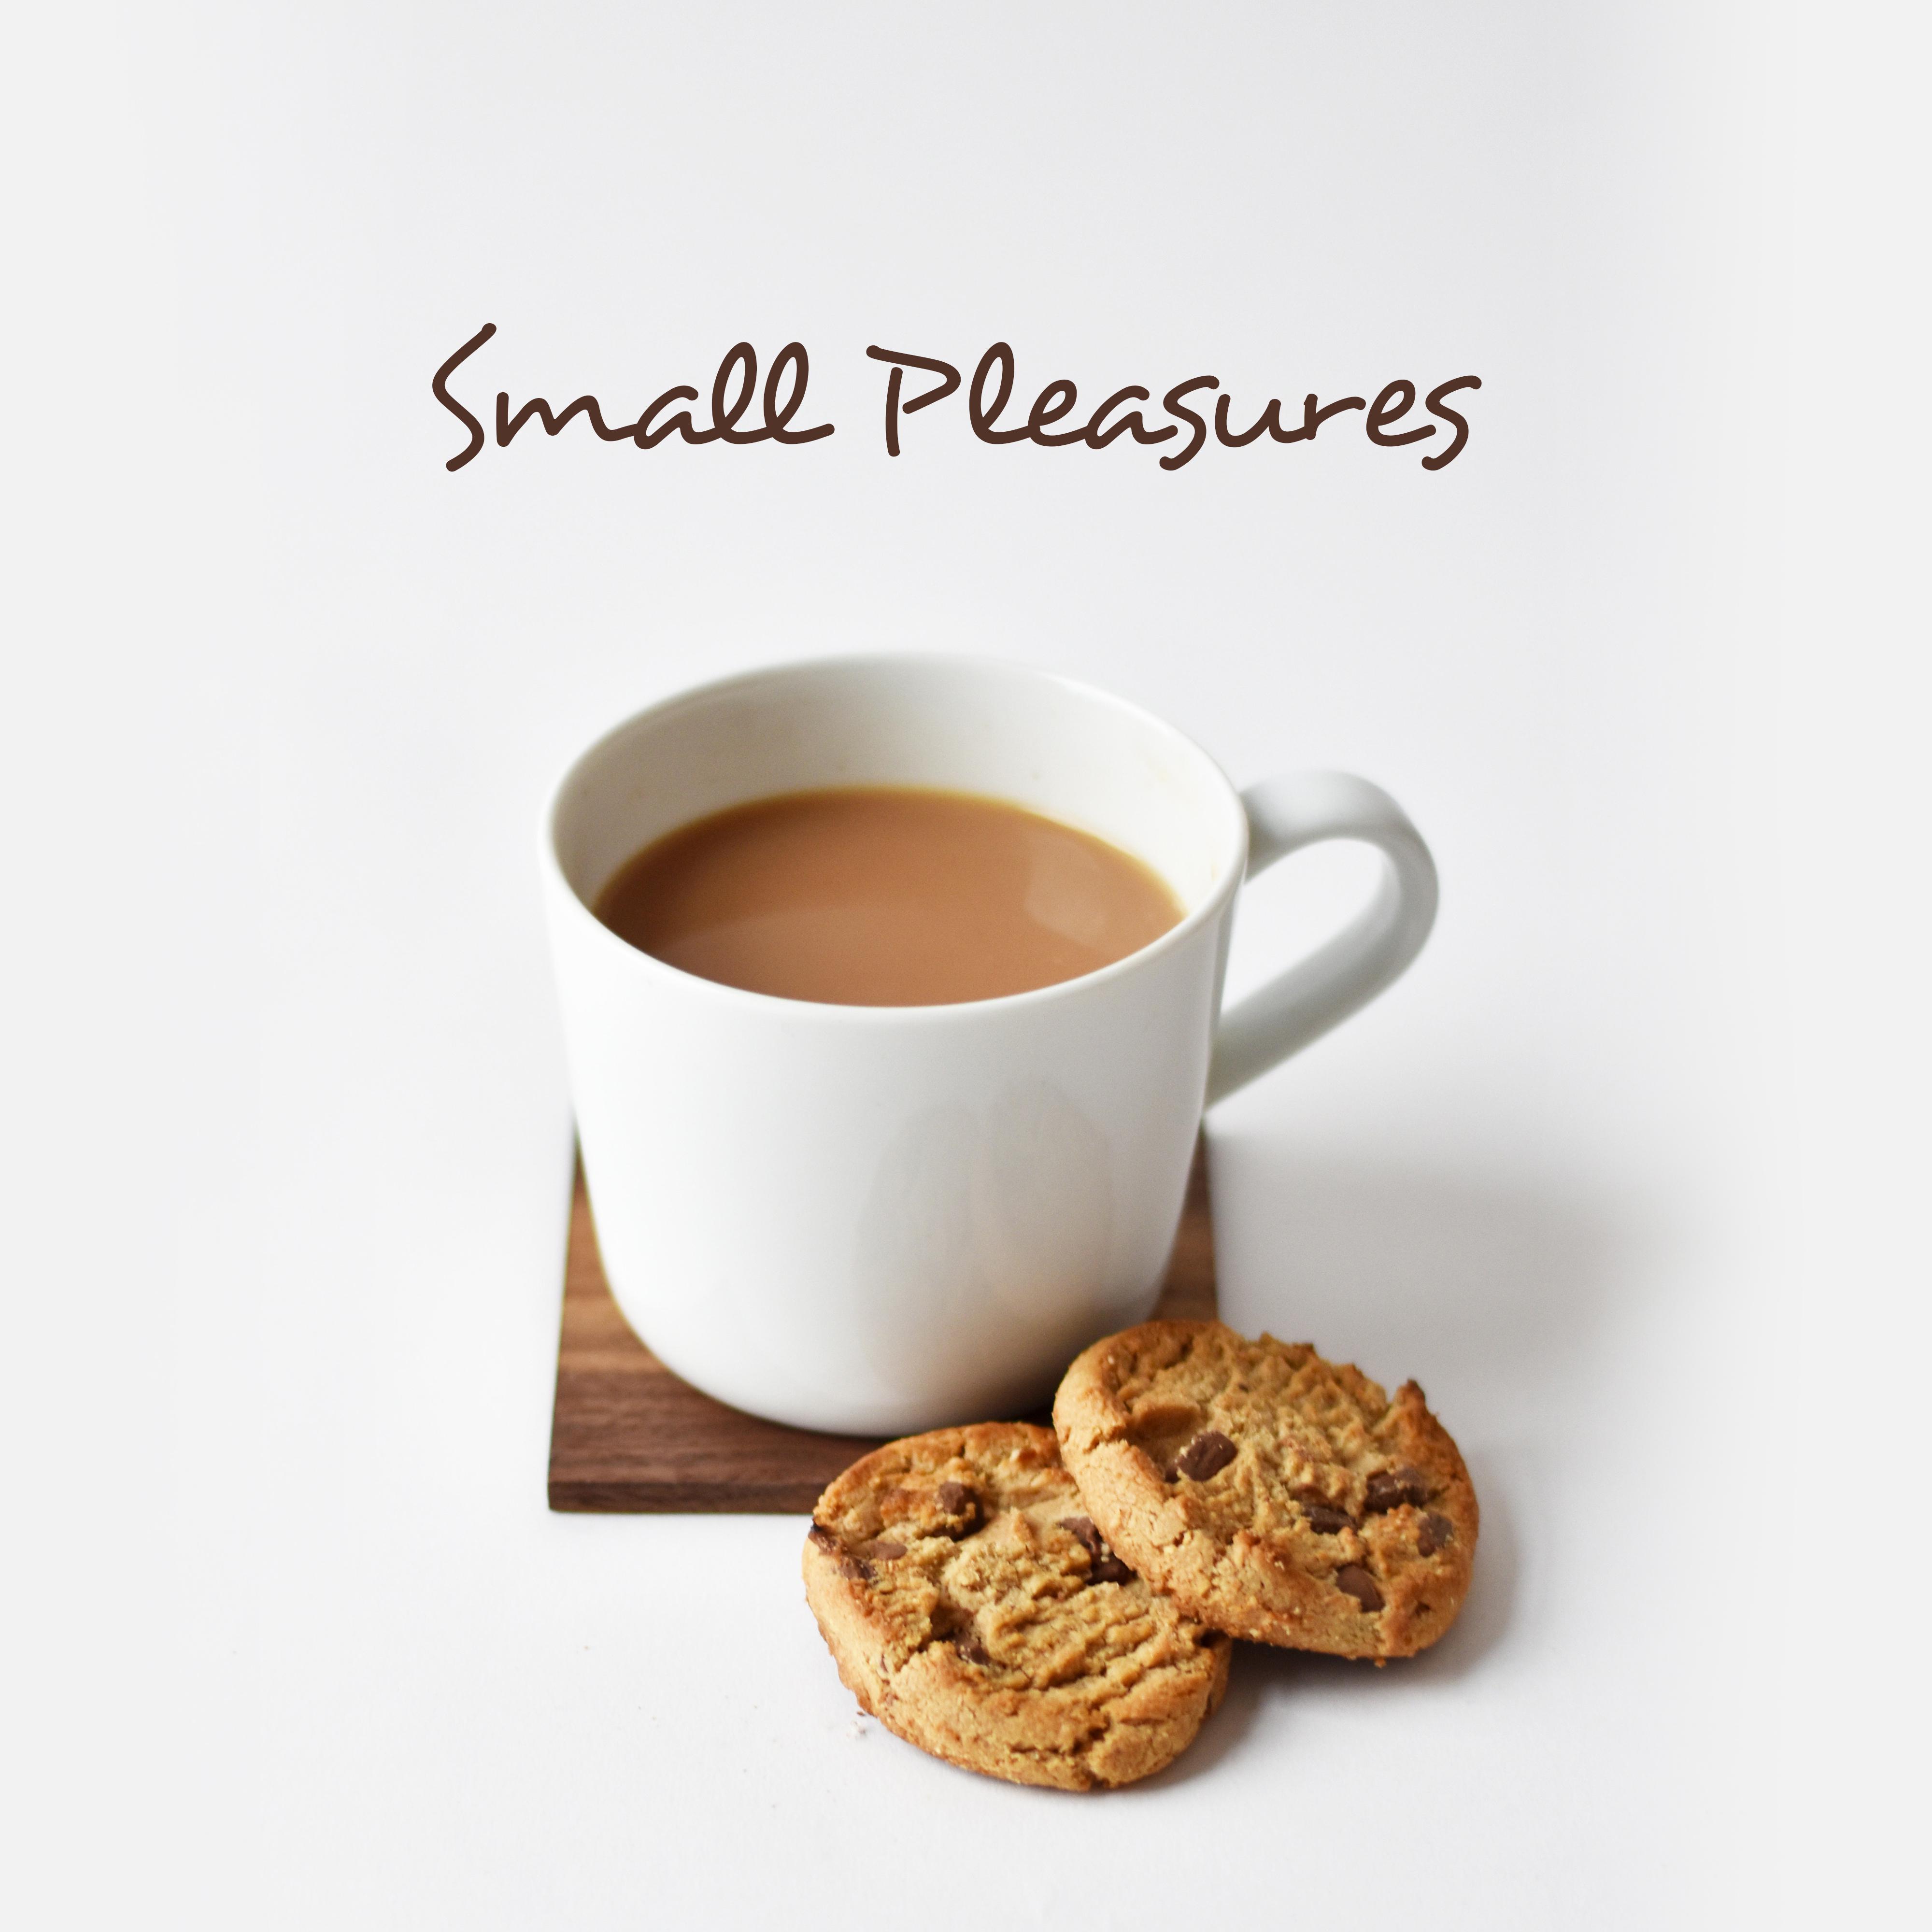 Small Pleasures: Musical Compilation for Well-Being, Comfort and Relaxation